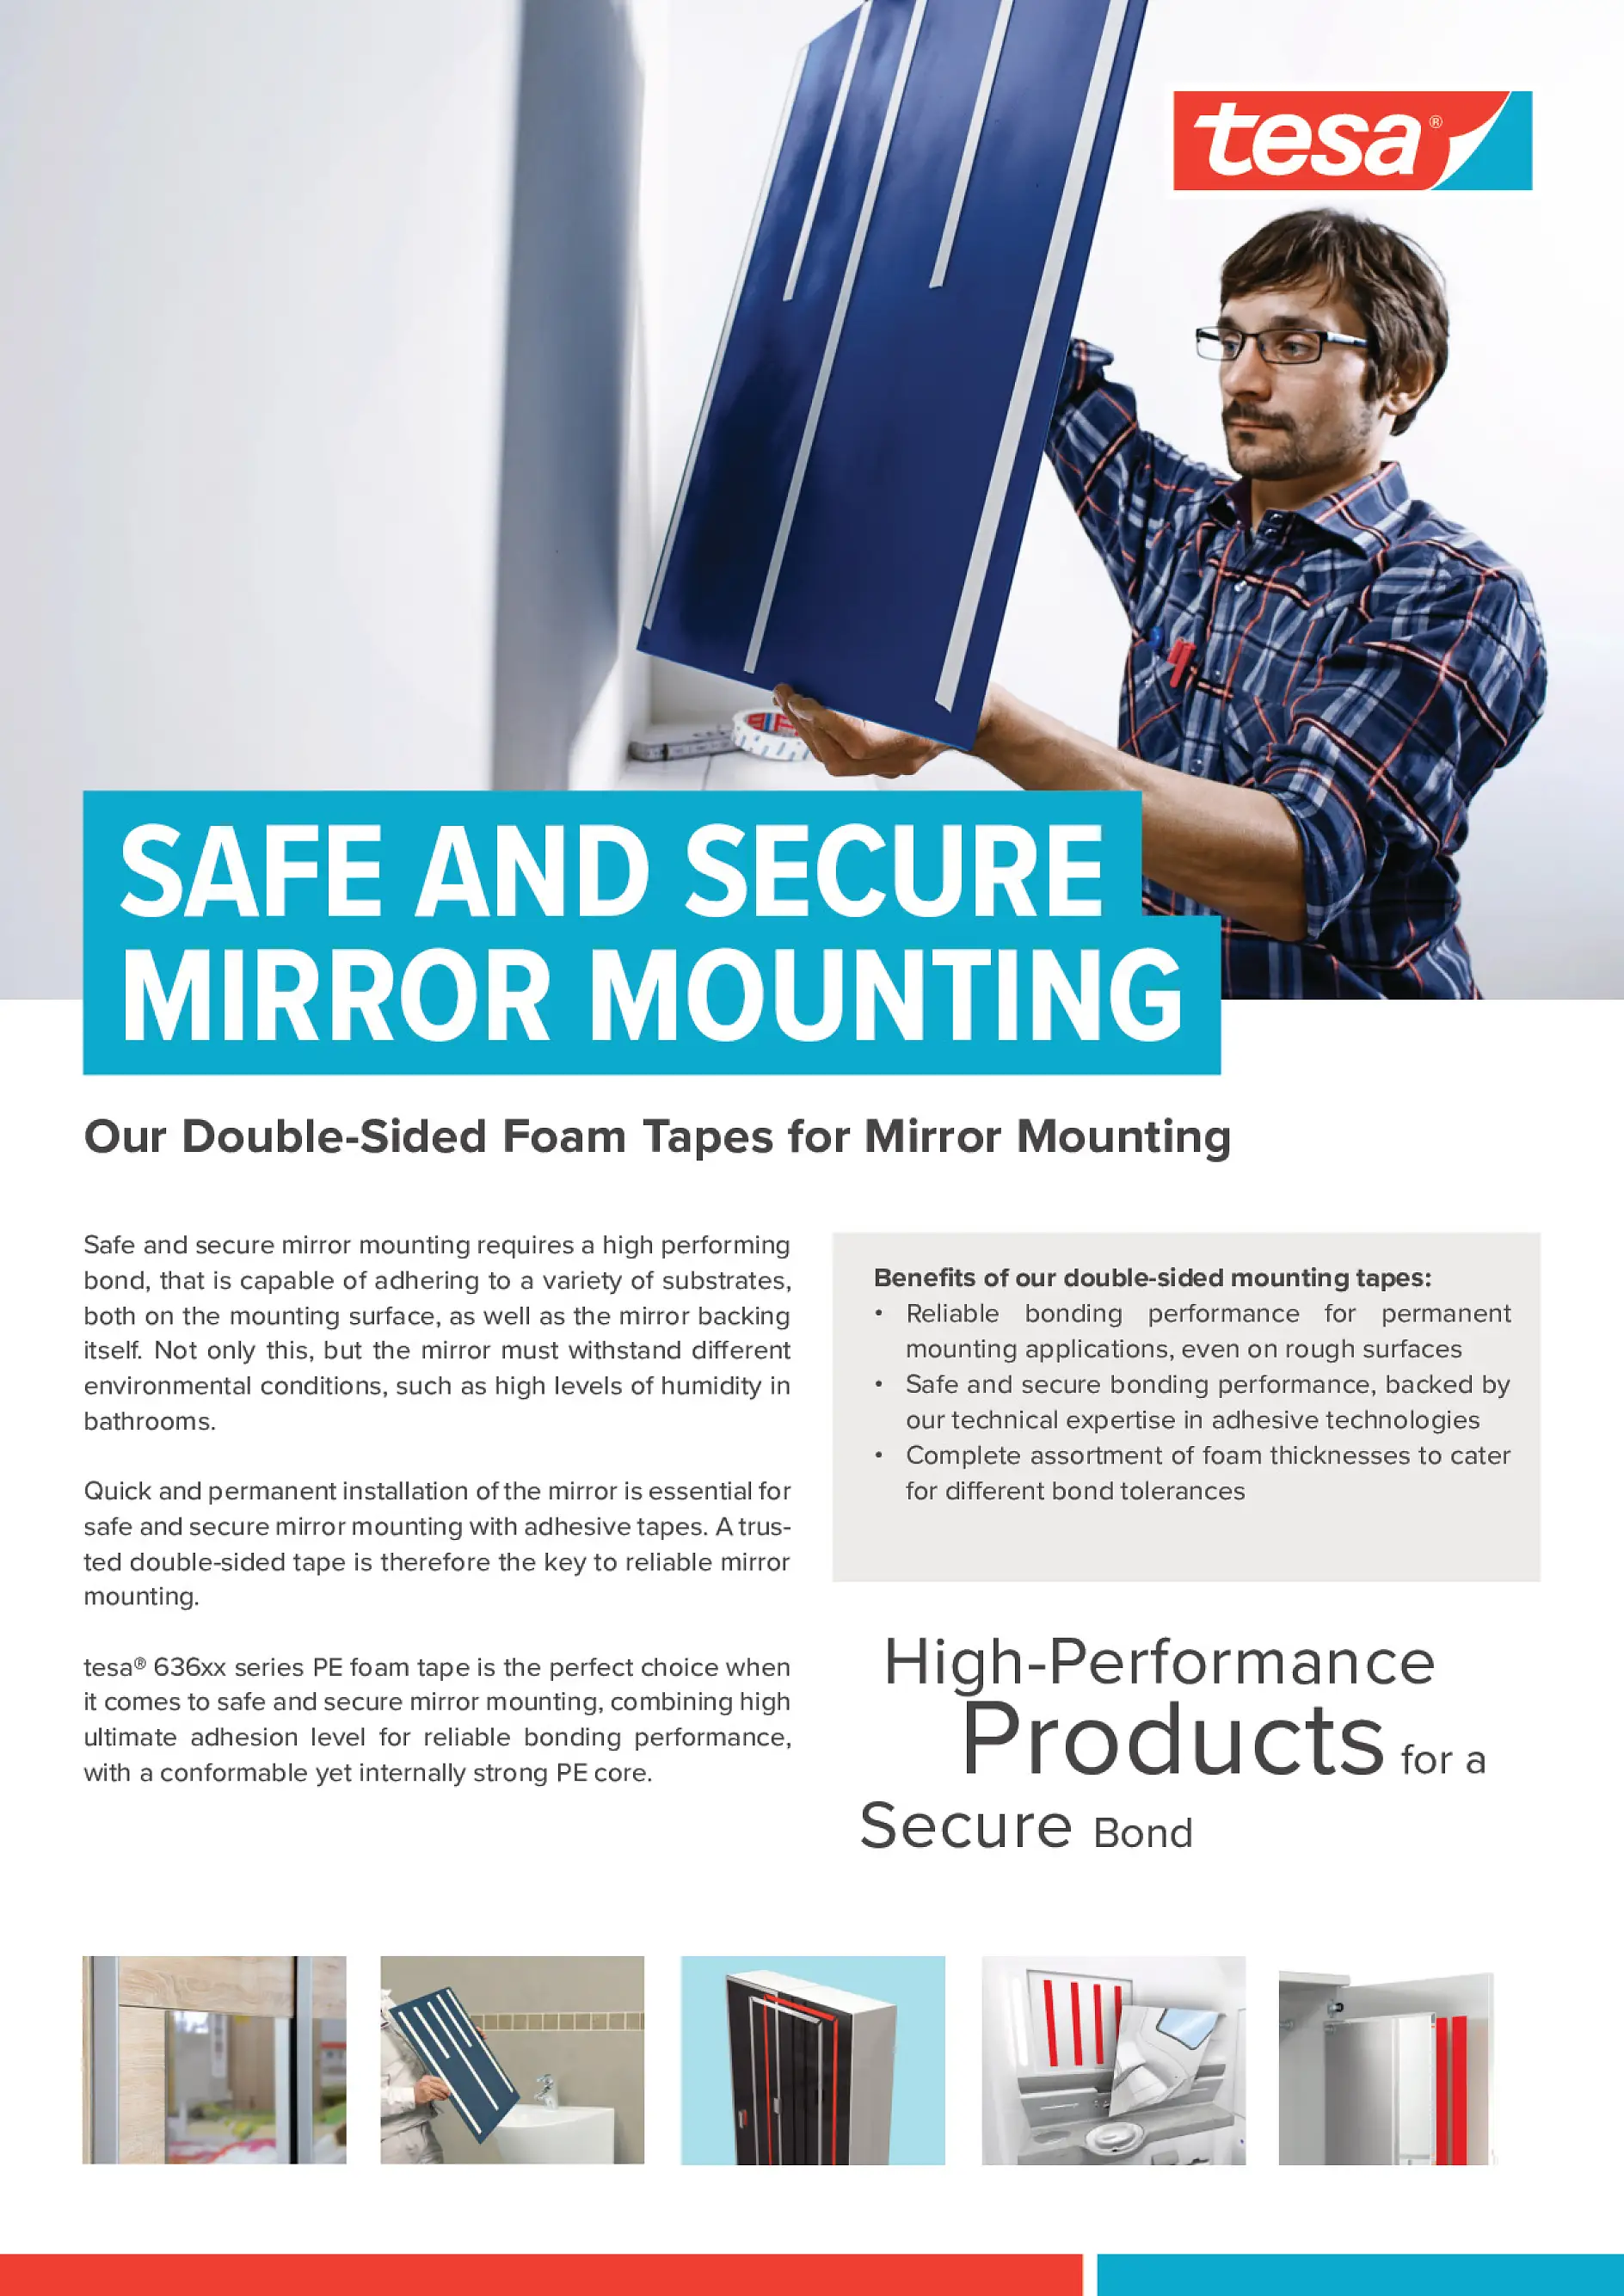 Mirror mounting solutions from tesa tape